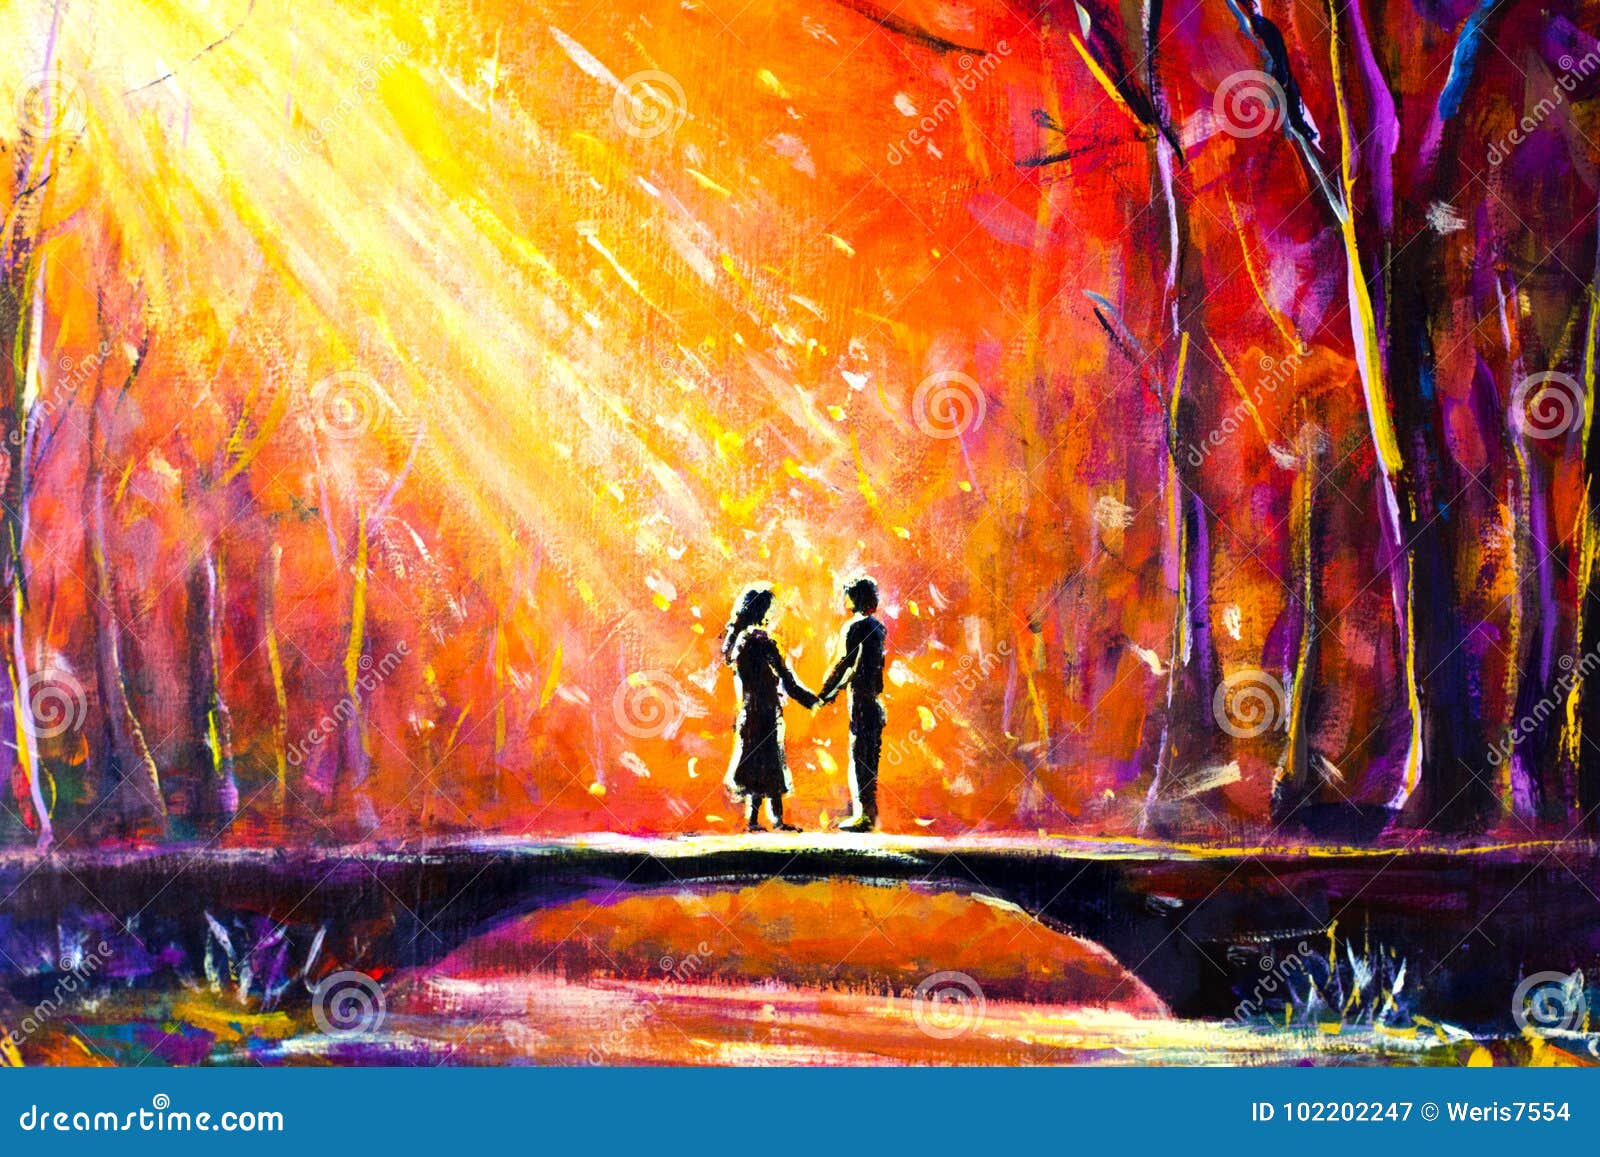 Fantasy Lovers Couple In Love Forest Trees Pink Flowers Art Canvas Pictures 